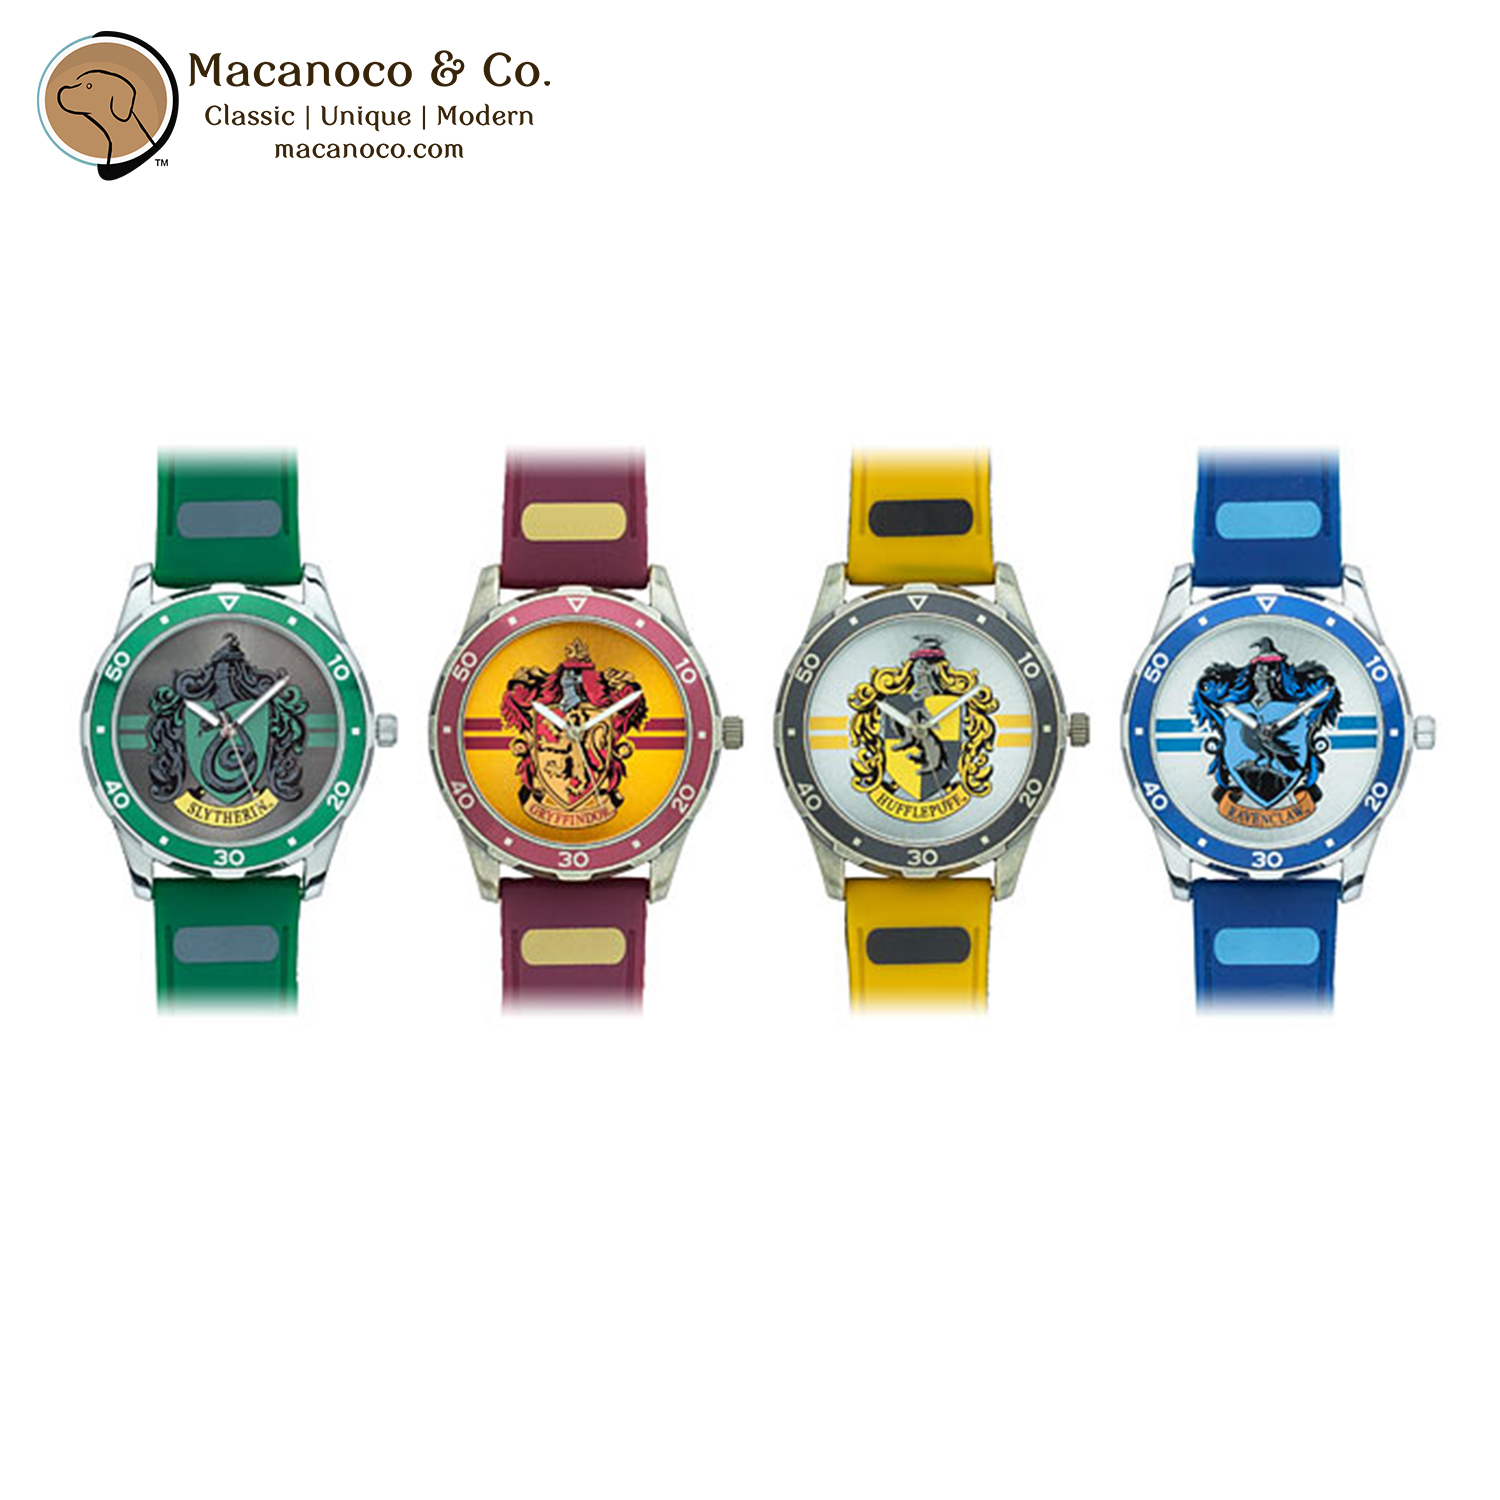 Harry Potter House Watches